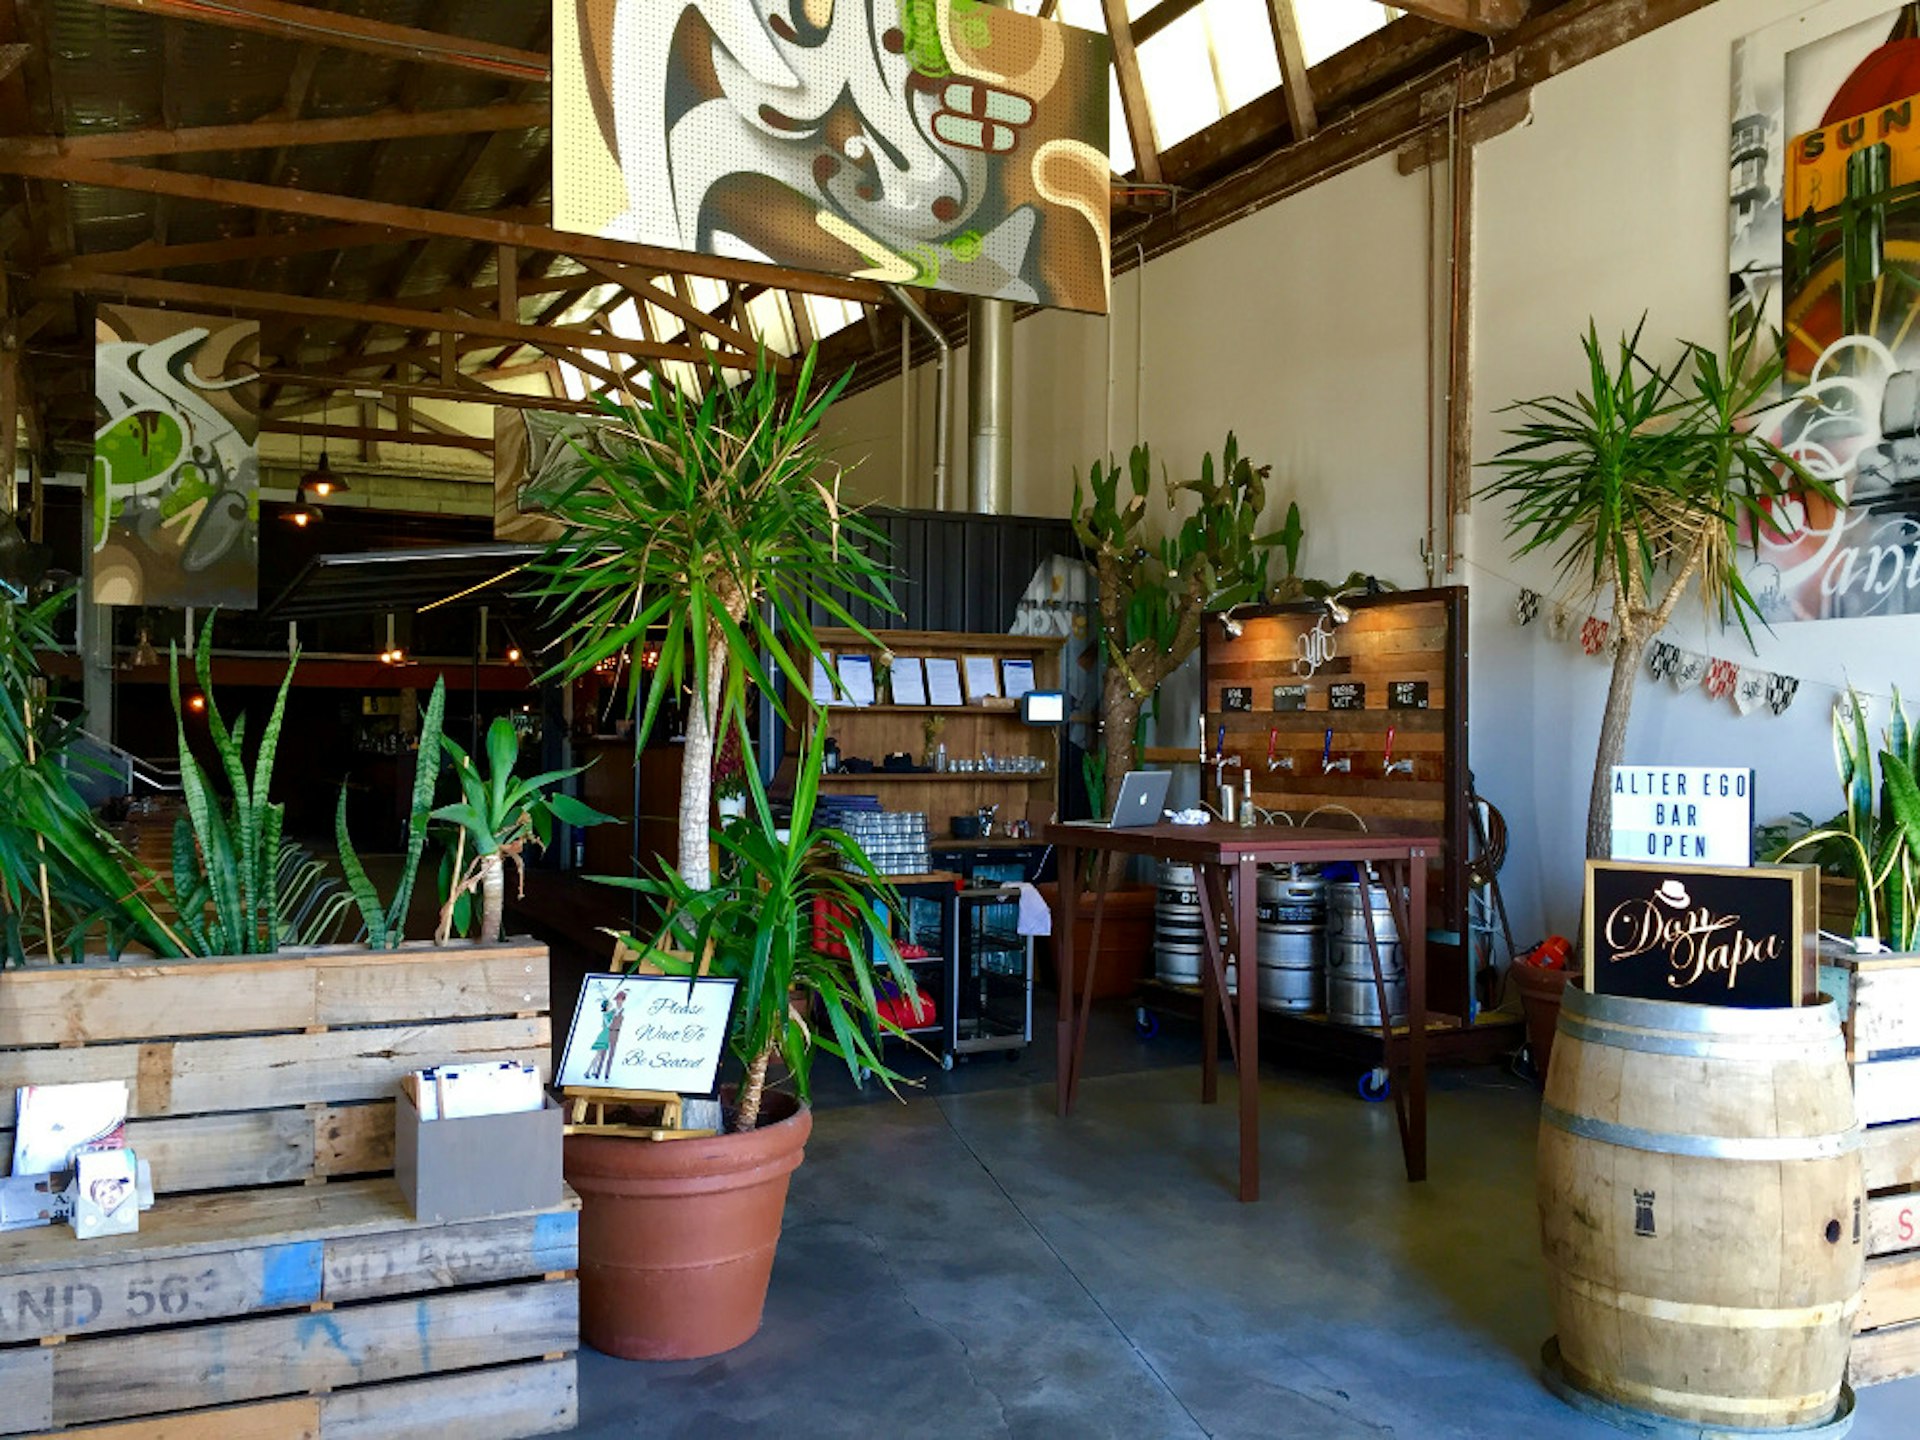 Set in a former warehouse in East Fremantle, The Mantle has restaurants, bars, a collaborative working space and art.